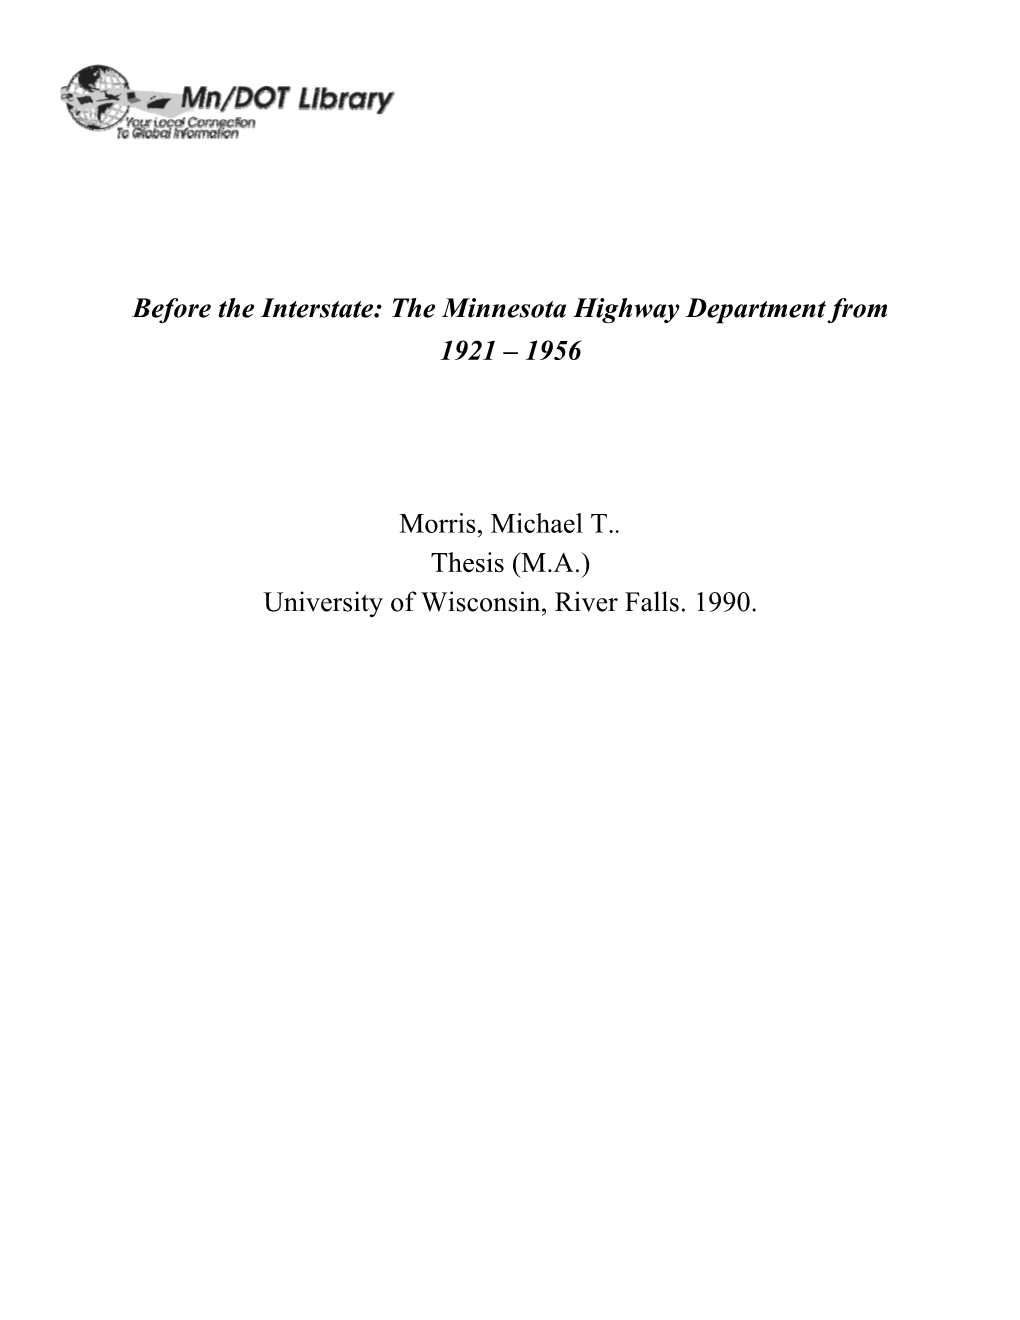 Before the Interstate: the Minnesota Highway Department from 1921 – 1956